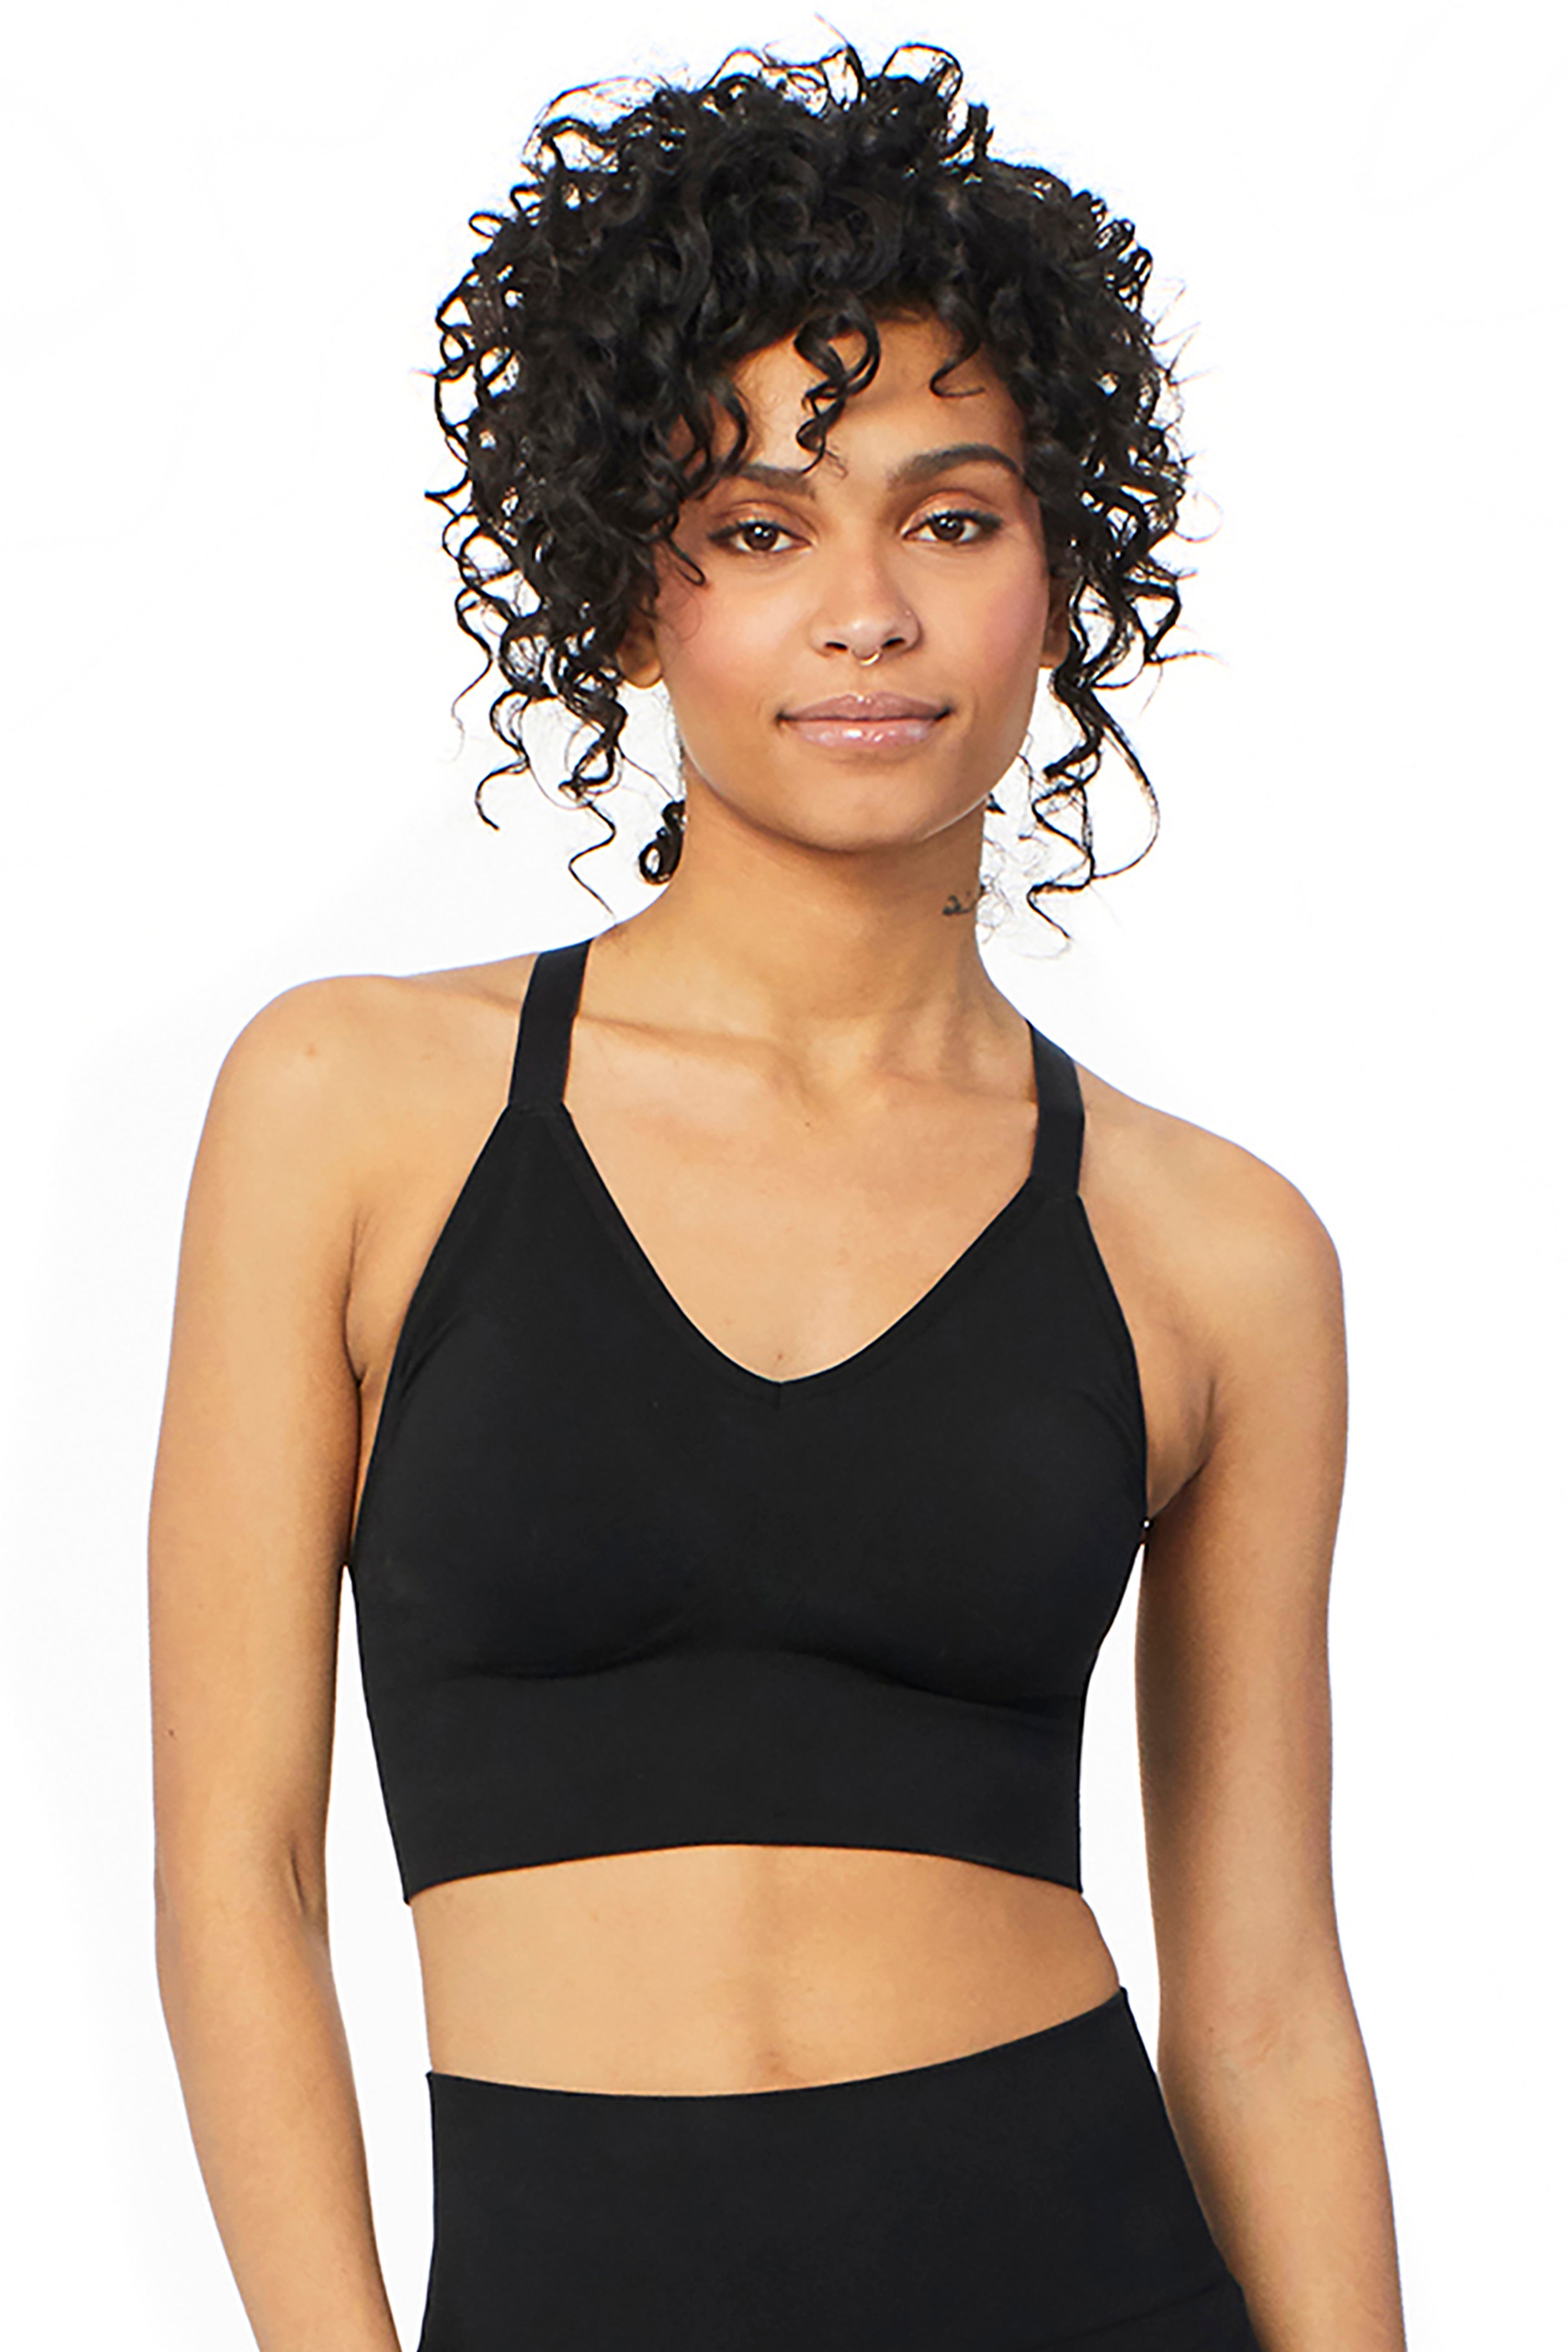 Coinpond Strappy Longline Sports Bras for Women Cute India